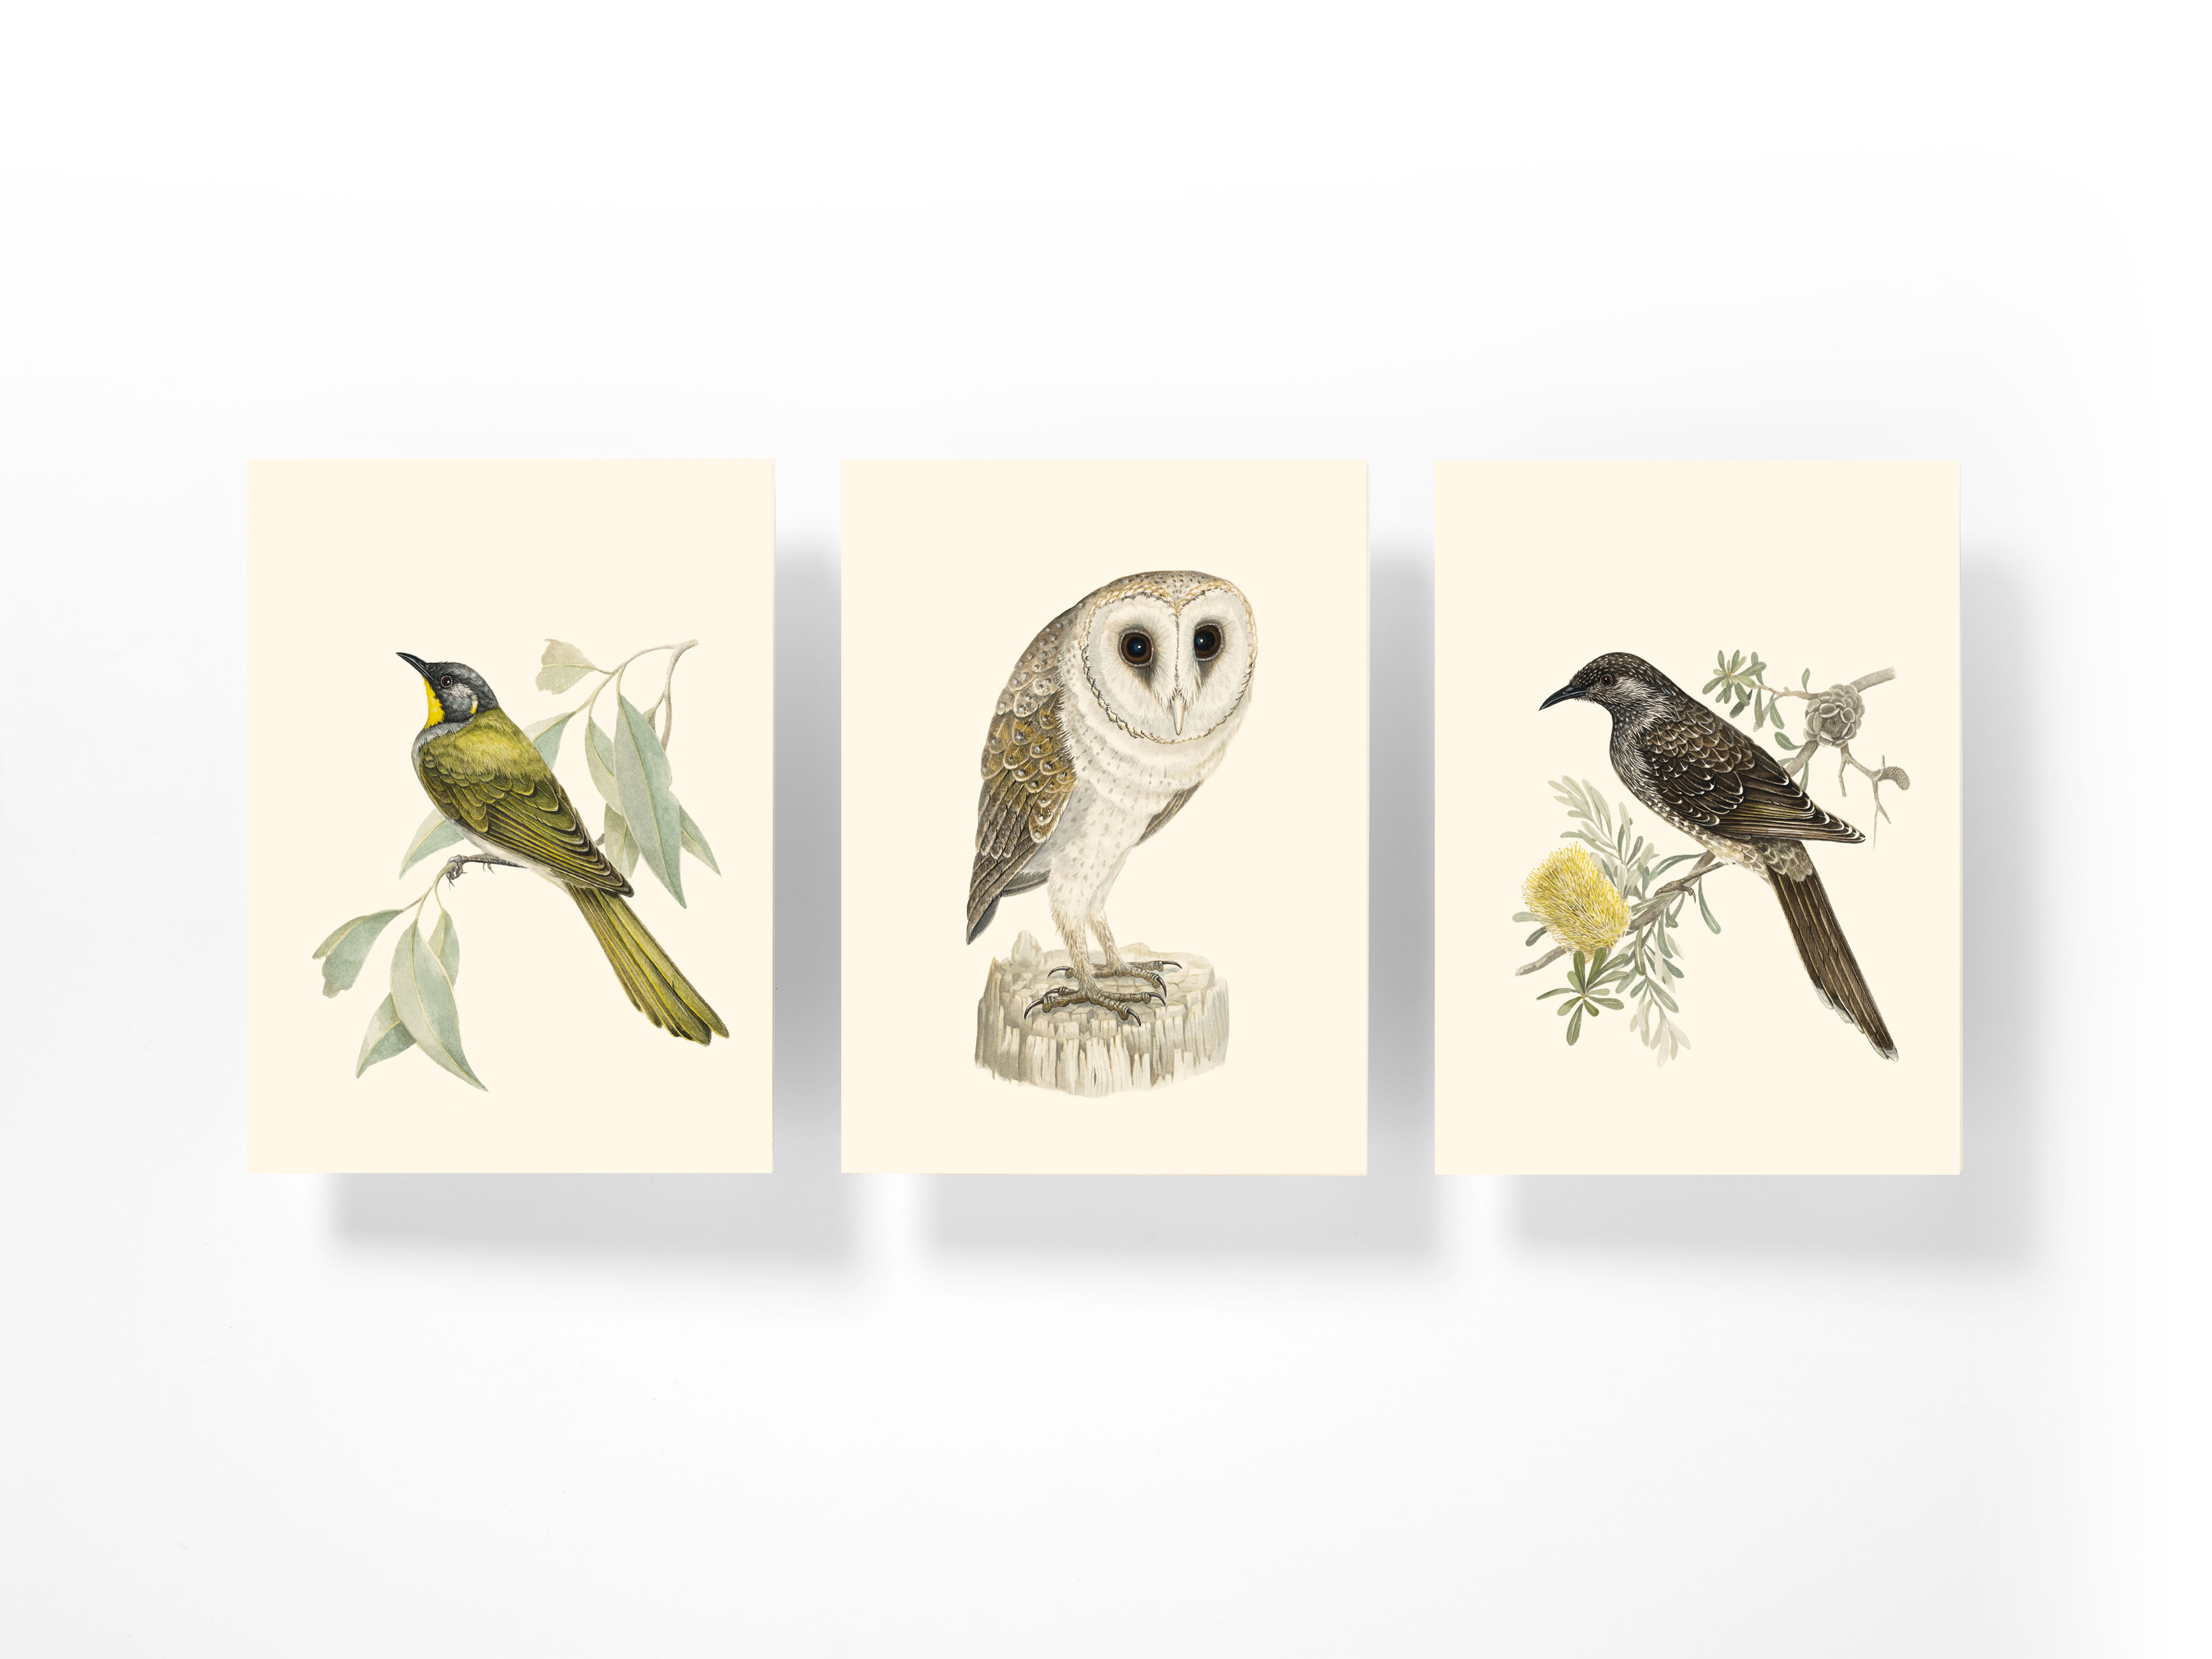 Photograph shows three of the cards from the box set of Tasmanian birds: Yellow-throated Honeyeater, Barn Owl, Little Wattlebird. Photo: Peter Whyte.